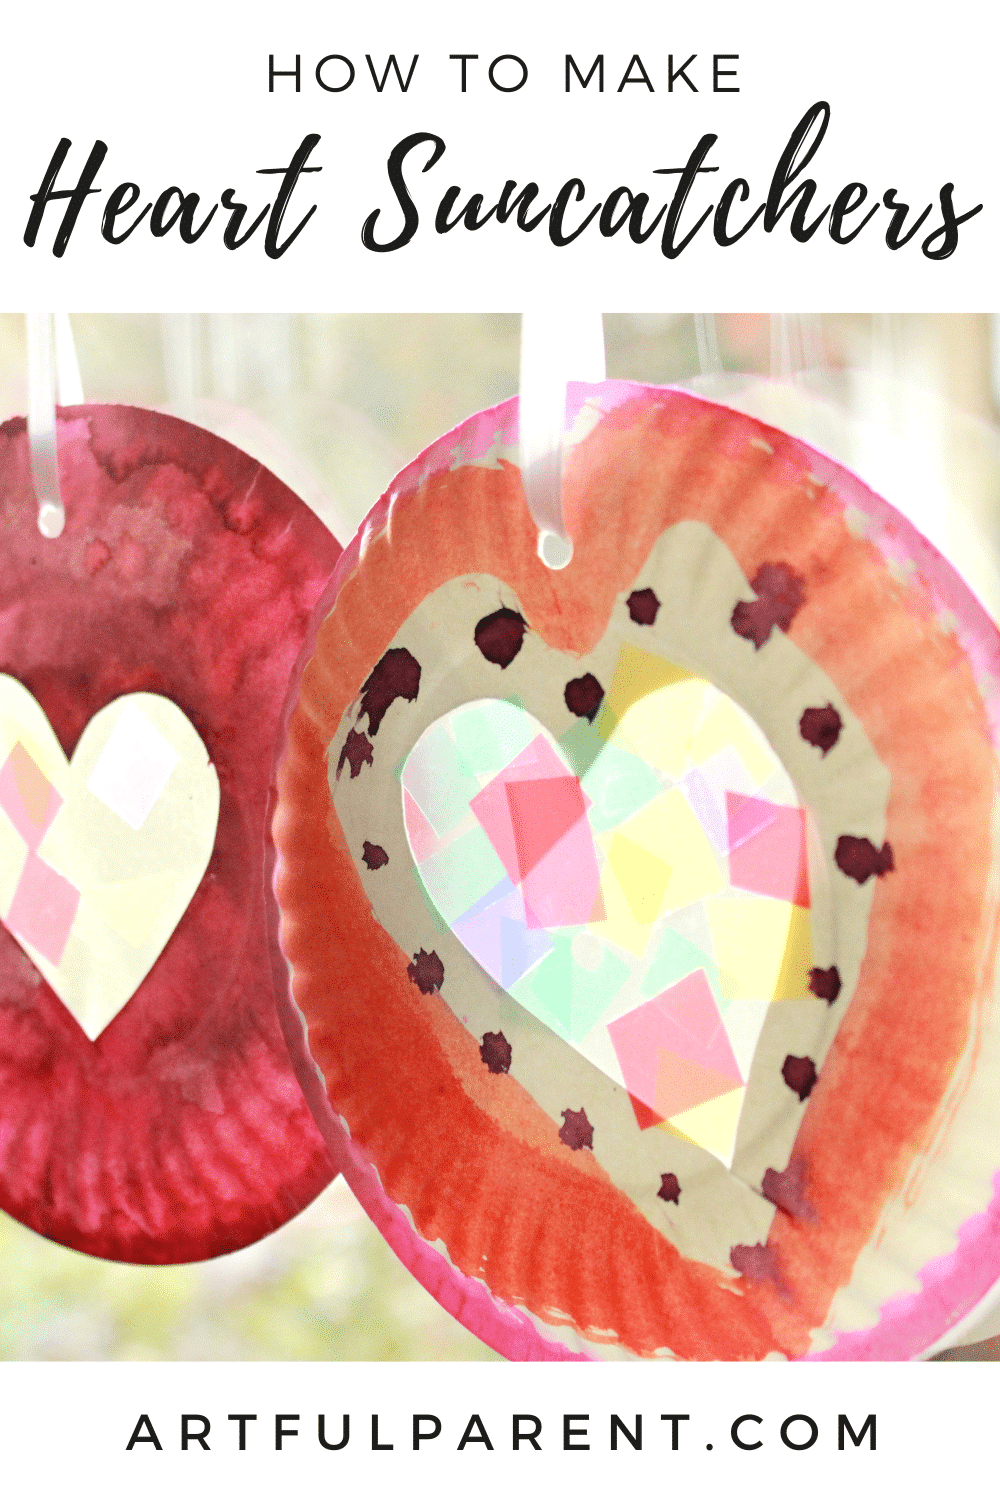 How to Make Heart Suncatchers with Paper Plates